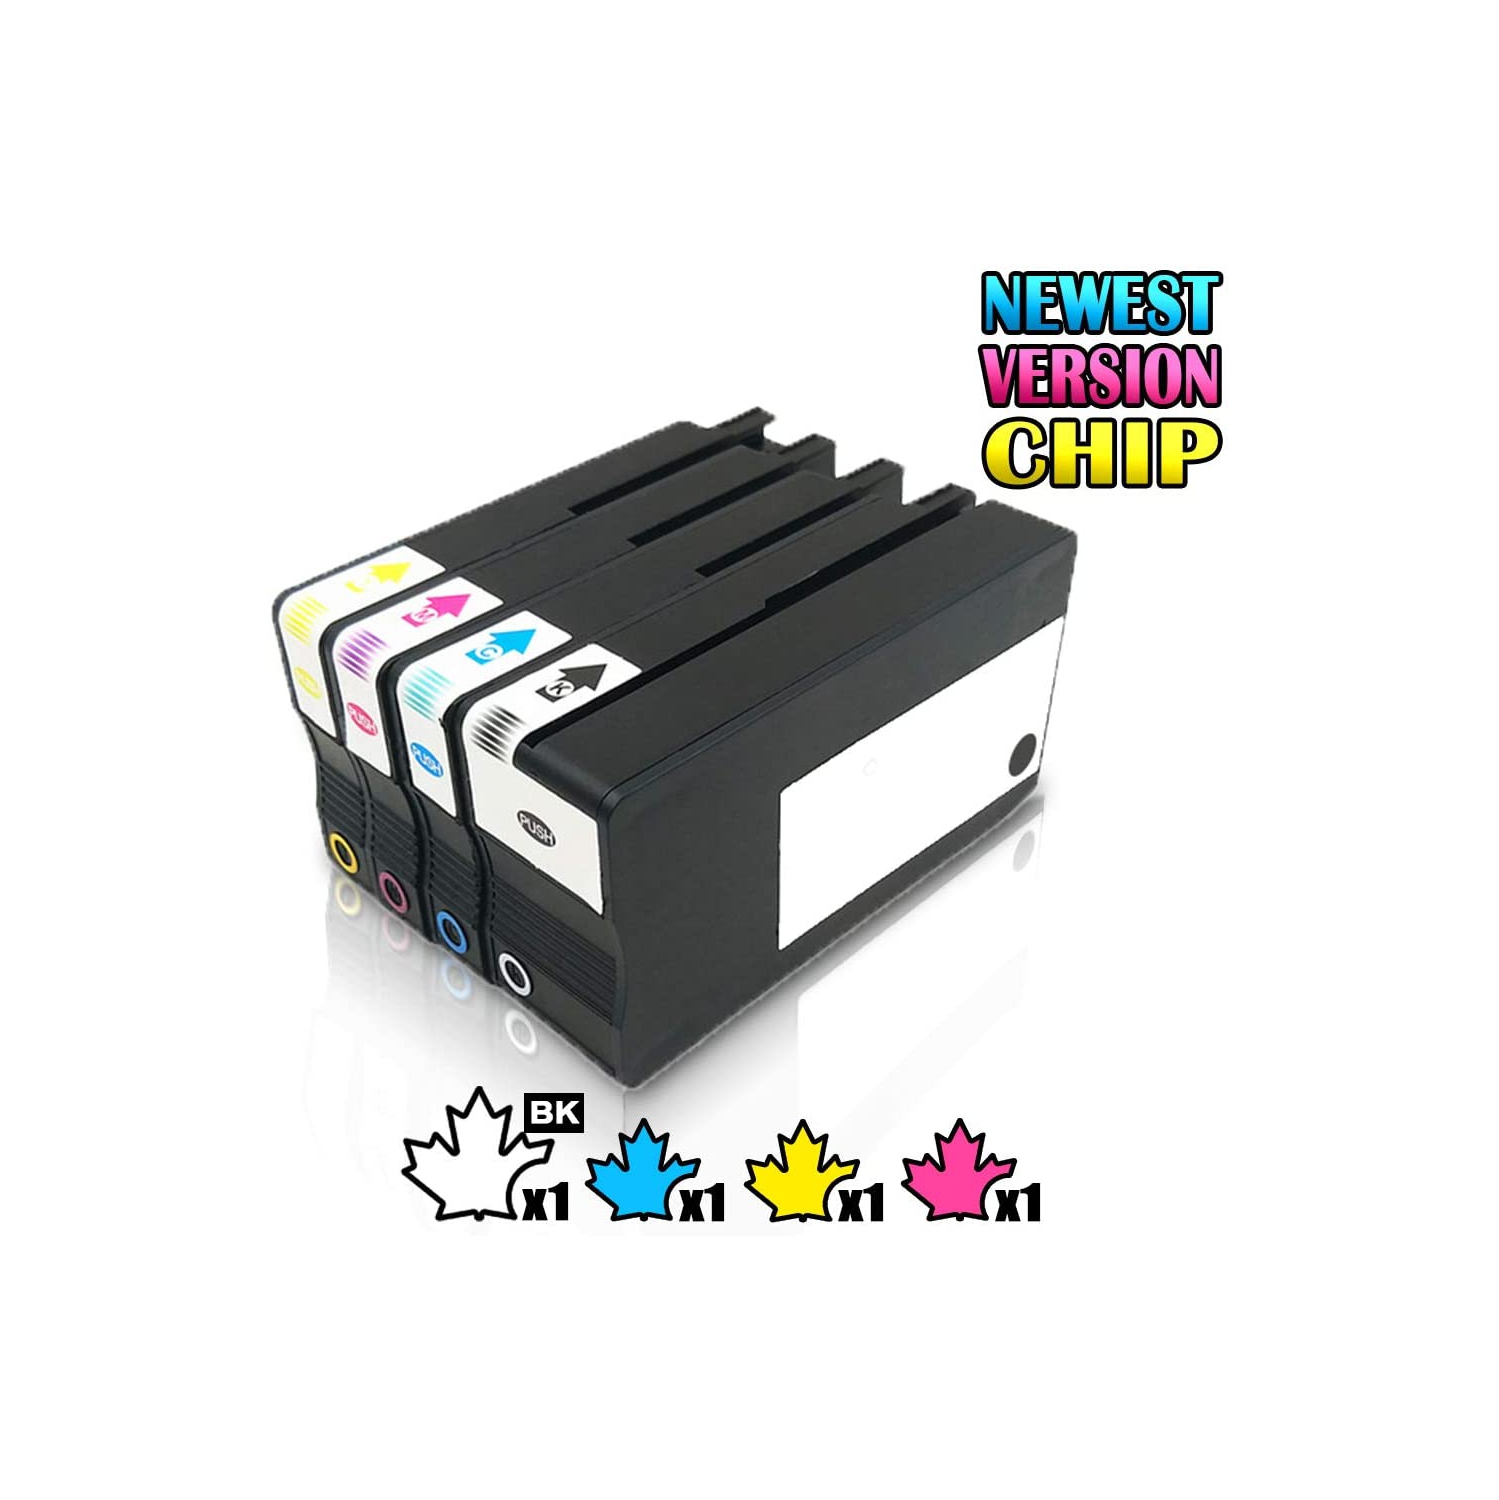 4 Color Inkfirst Remanufactured Ink Cartridges Replacement for HP 952 952XL OfficeJet Pro 8725 8730 8740 7740 8210 8216 8710